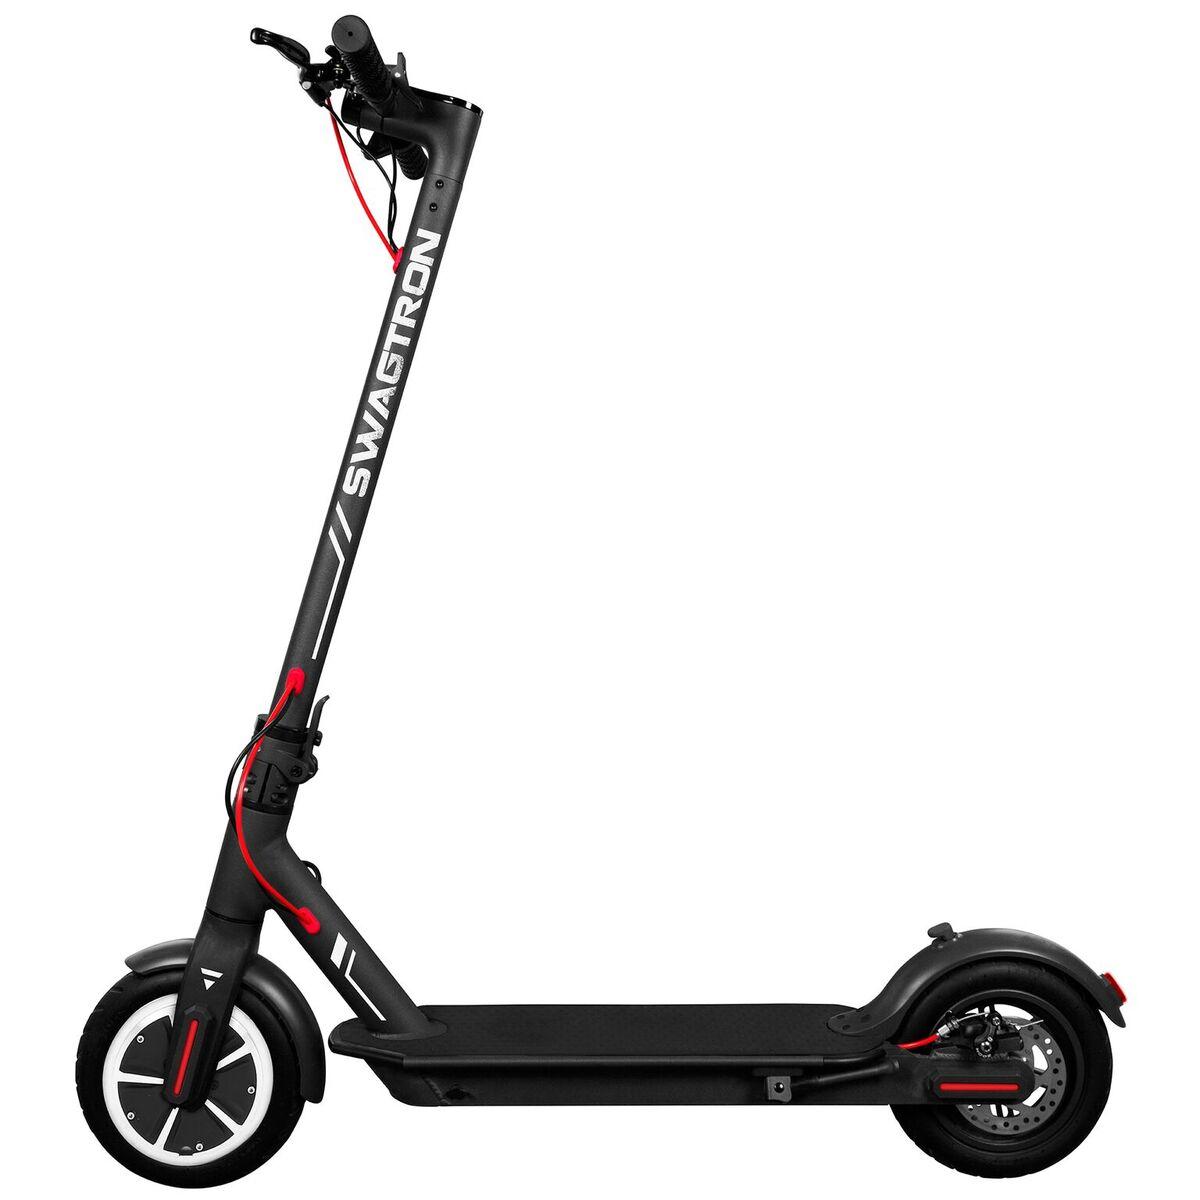 Top 5 Best Electric Scooters